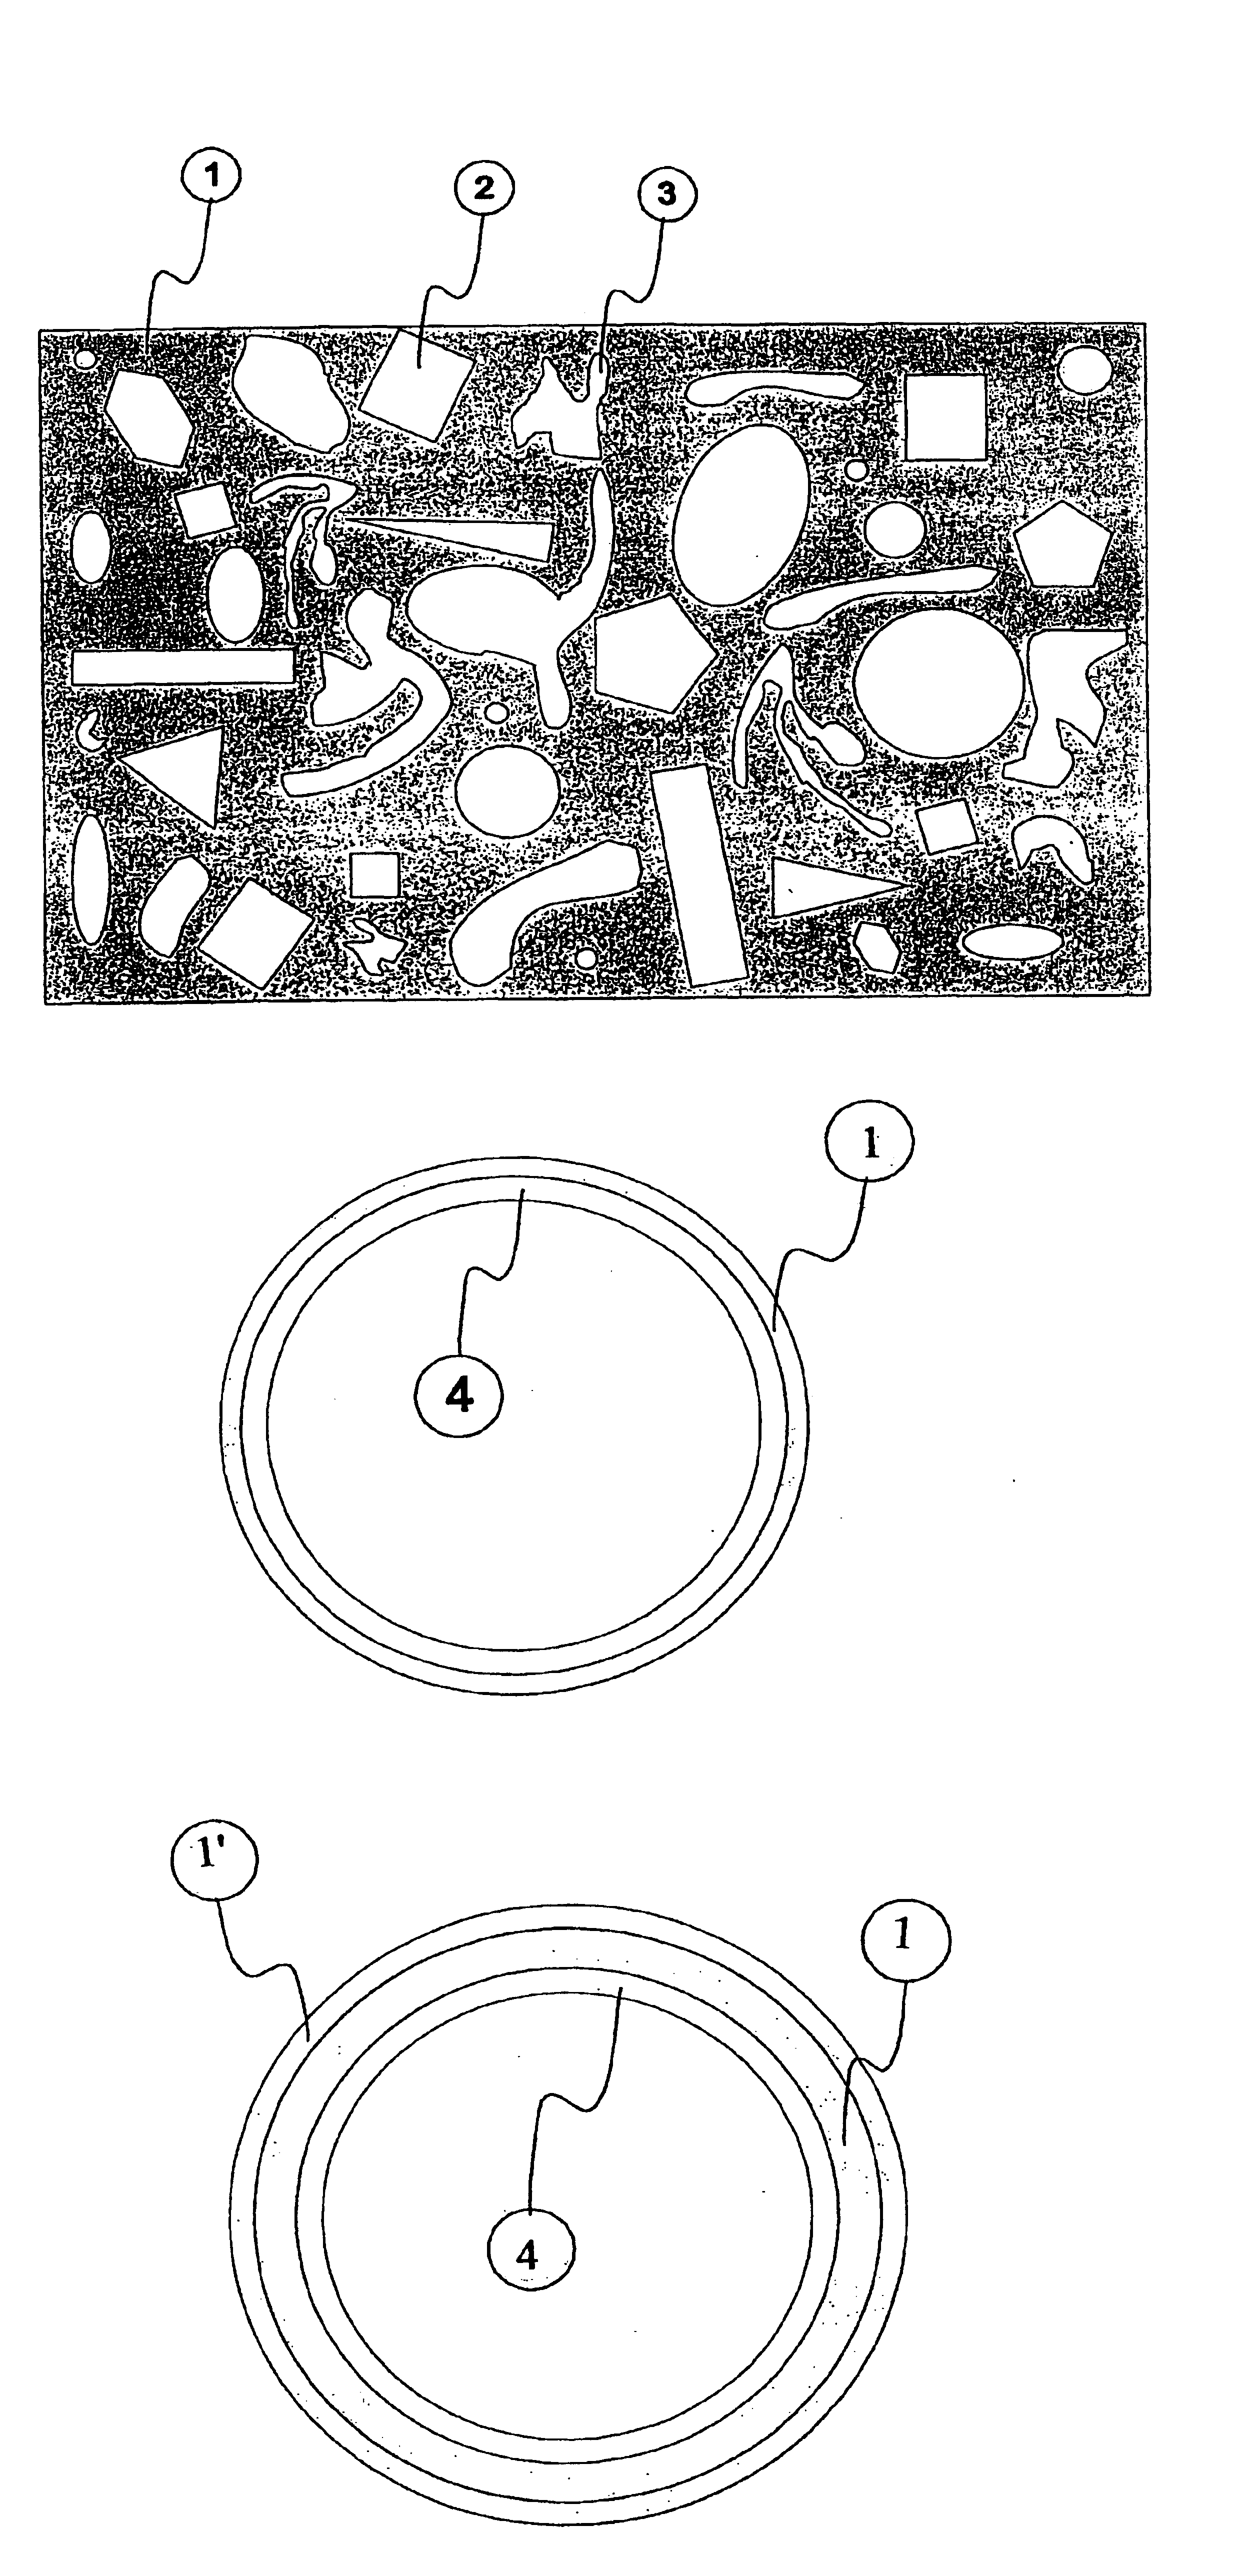 Integral passive shim system for a magnetic resonance apparatus